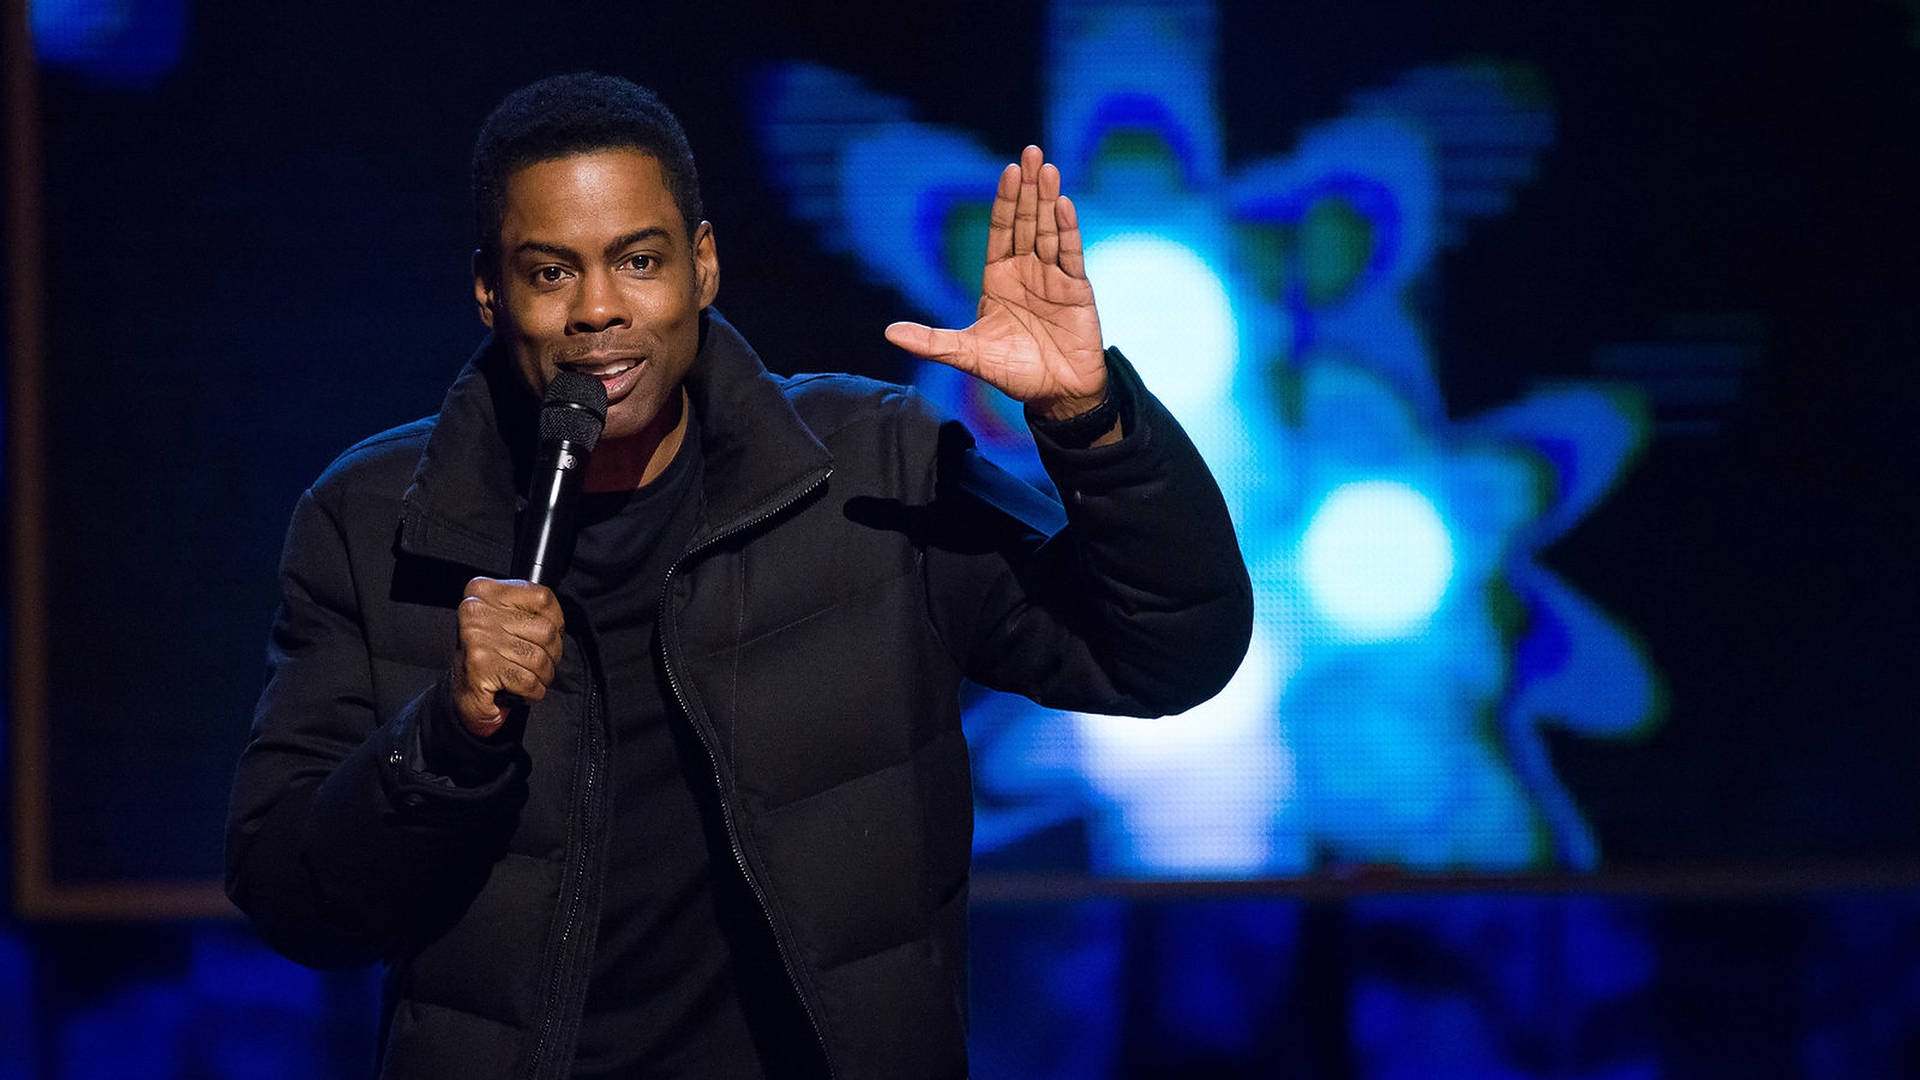 Chris Rock During a Live Stand-Up Performance Wallpaper